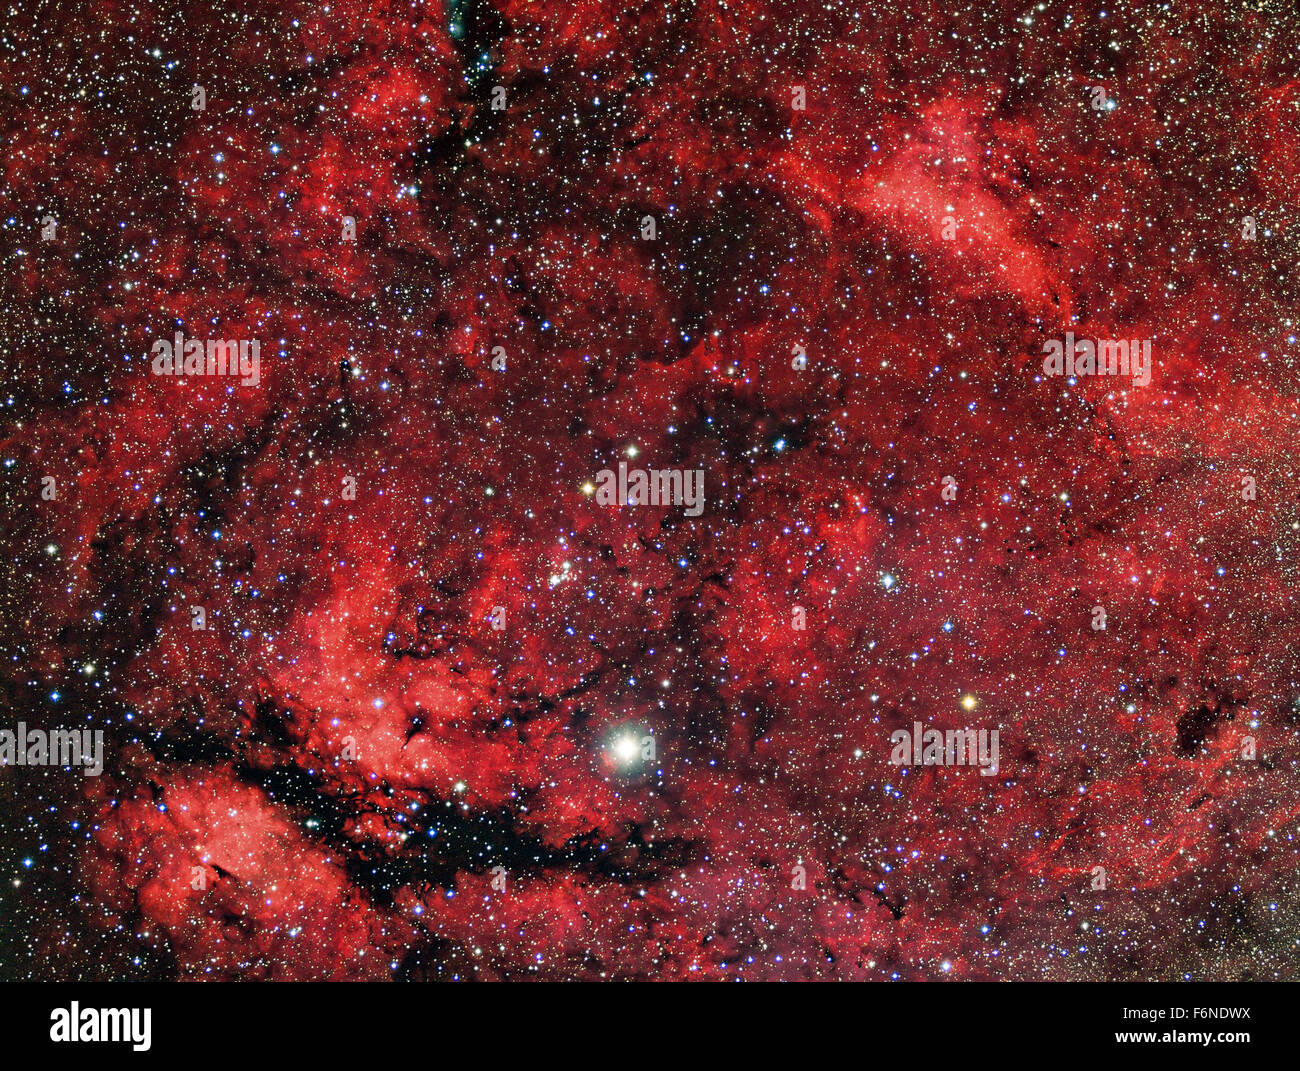 Sadr region in the constellation Cygnus. This image captured with a telescope and a scientific CCD camera Stock Photo